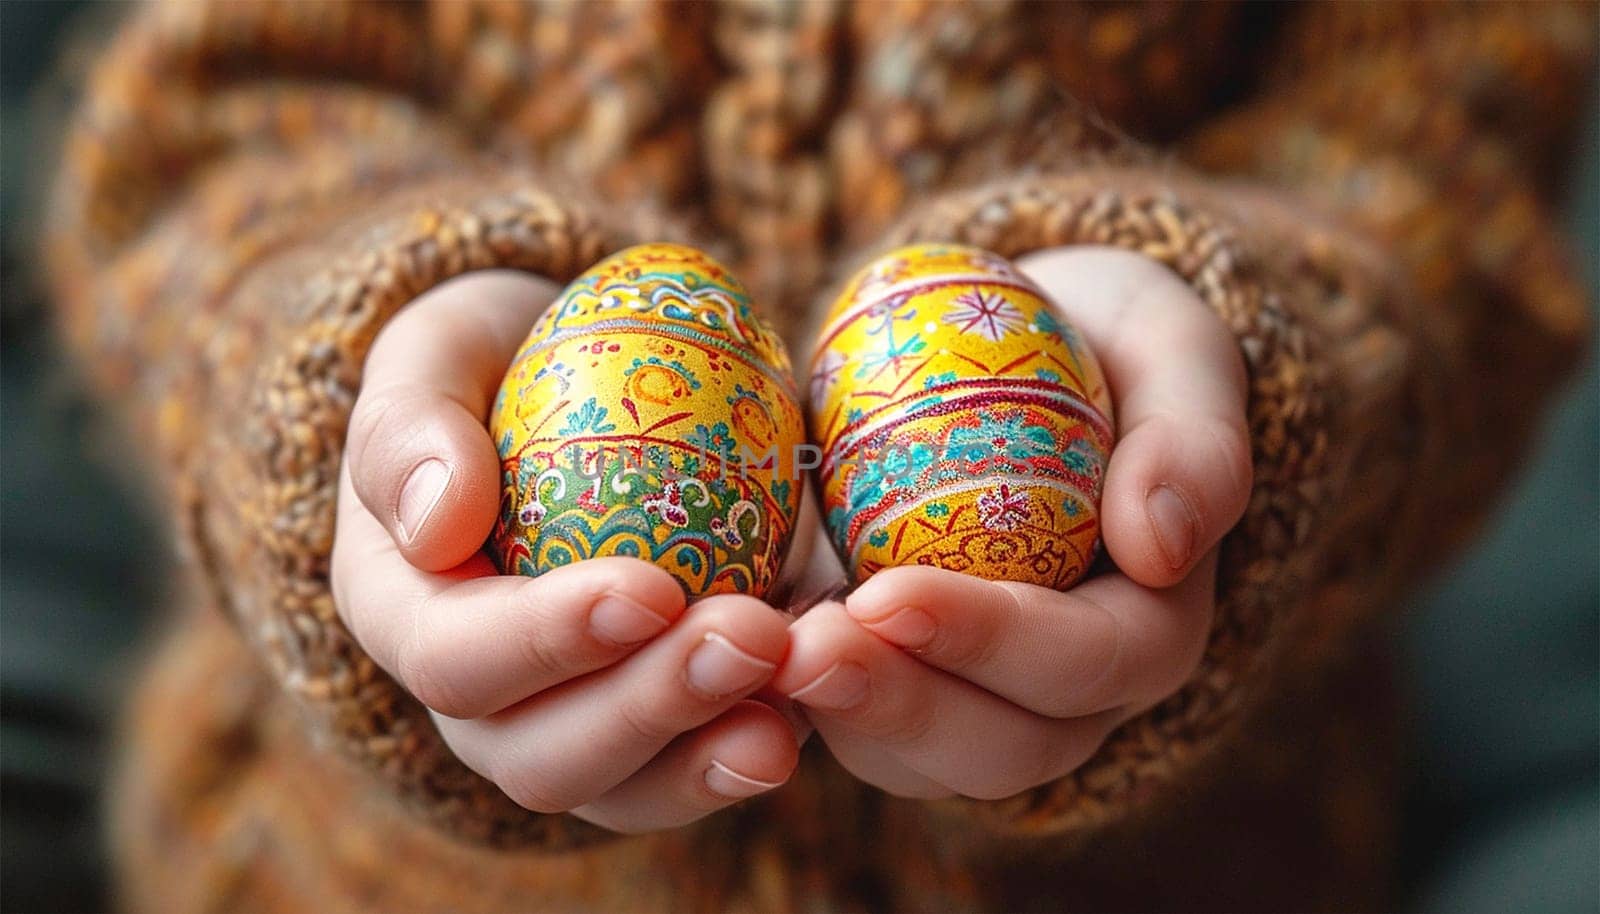 The hands of a little girl holding painted Easter egg front view, Happy Easter Holiday design decorated egg with beautiful colorful details by Annebel146